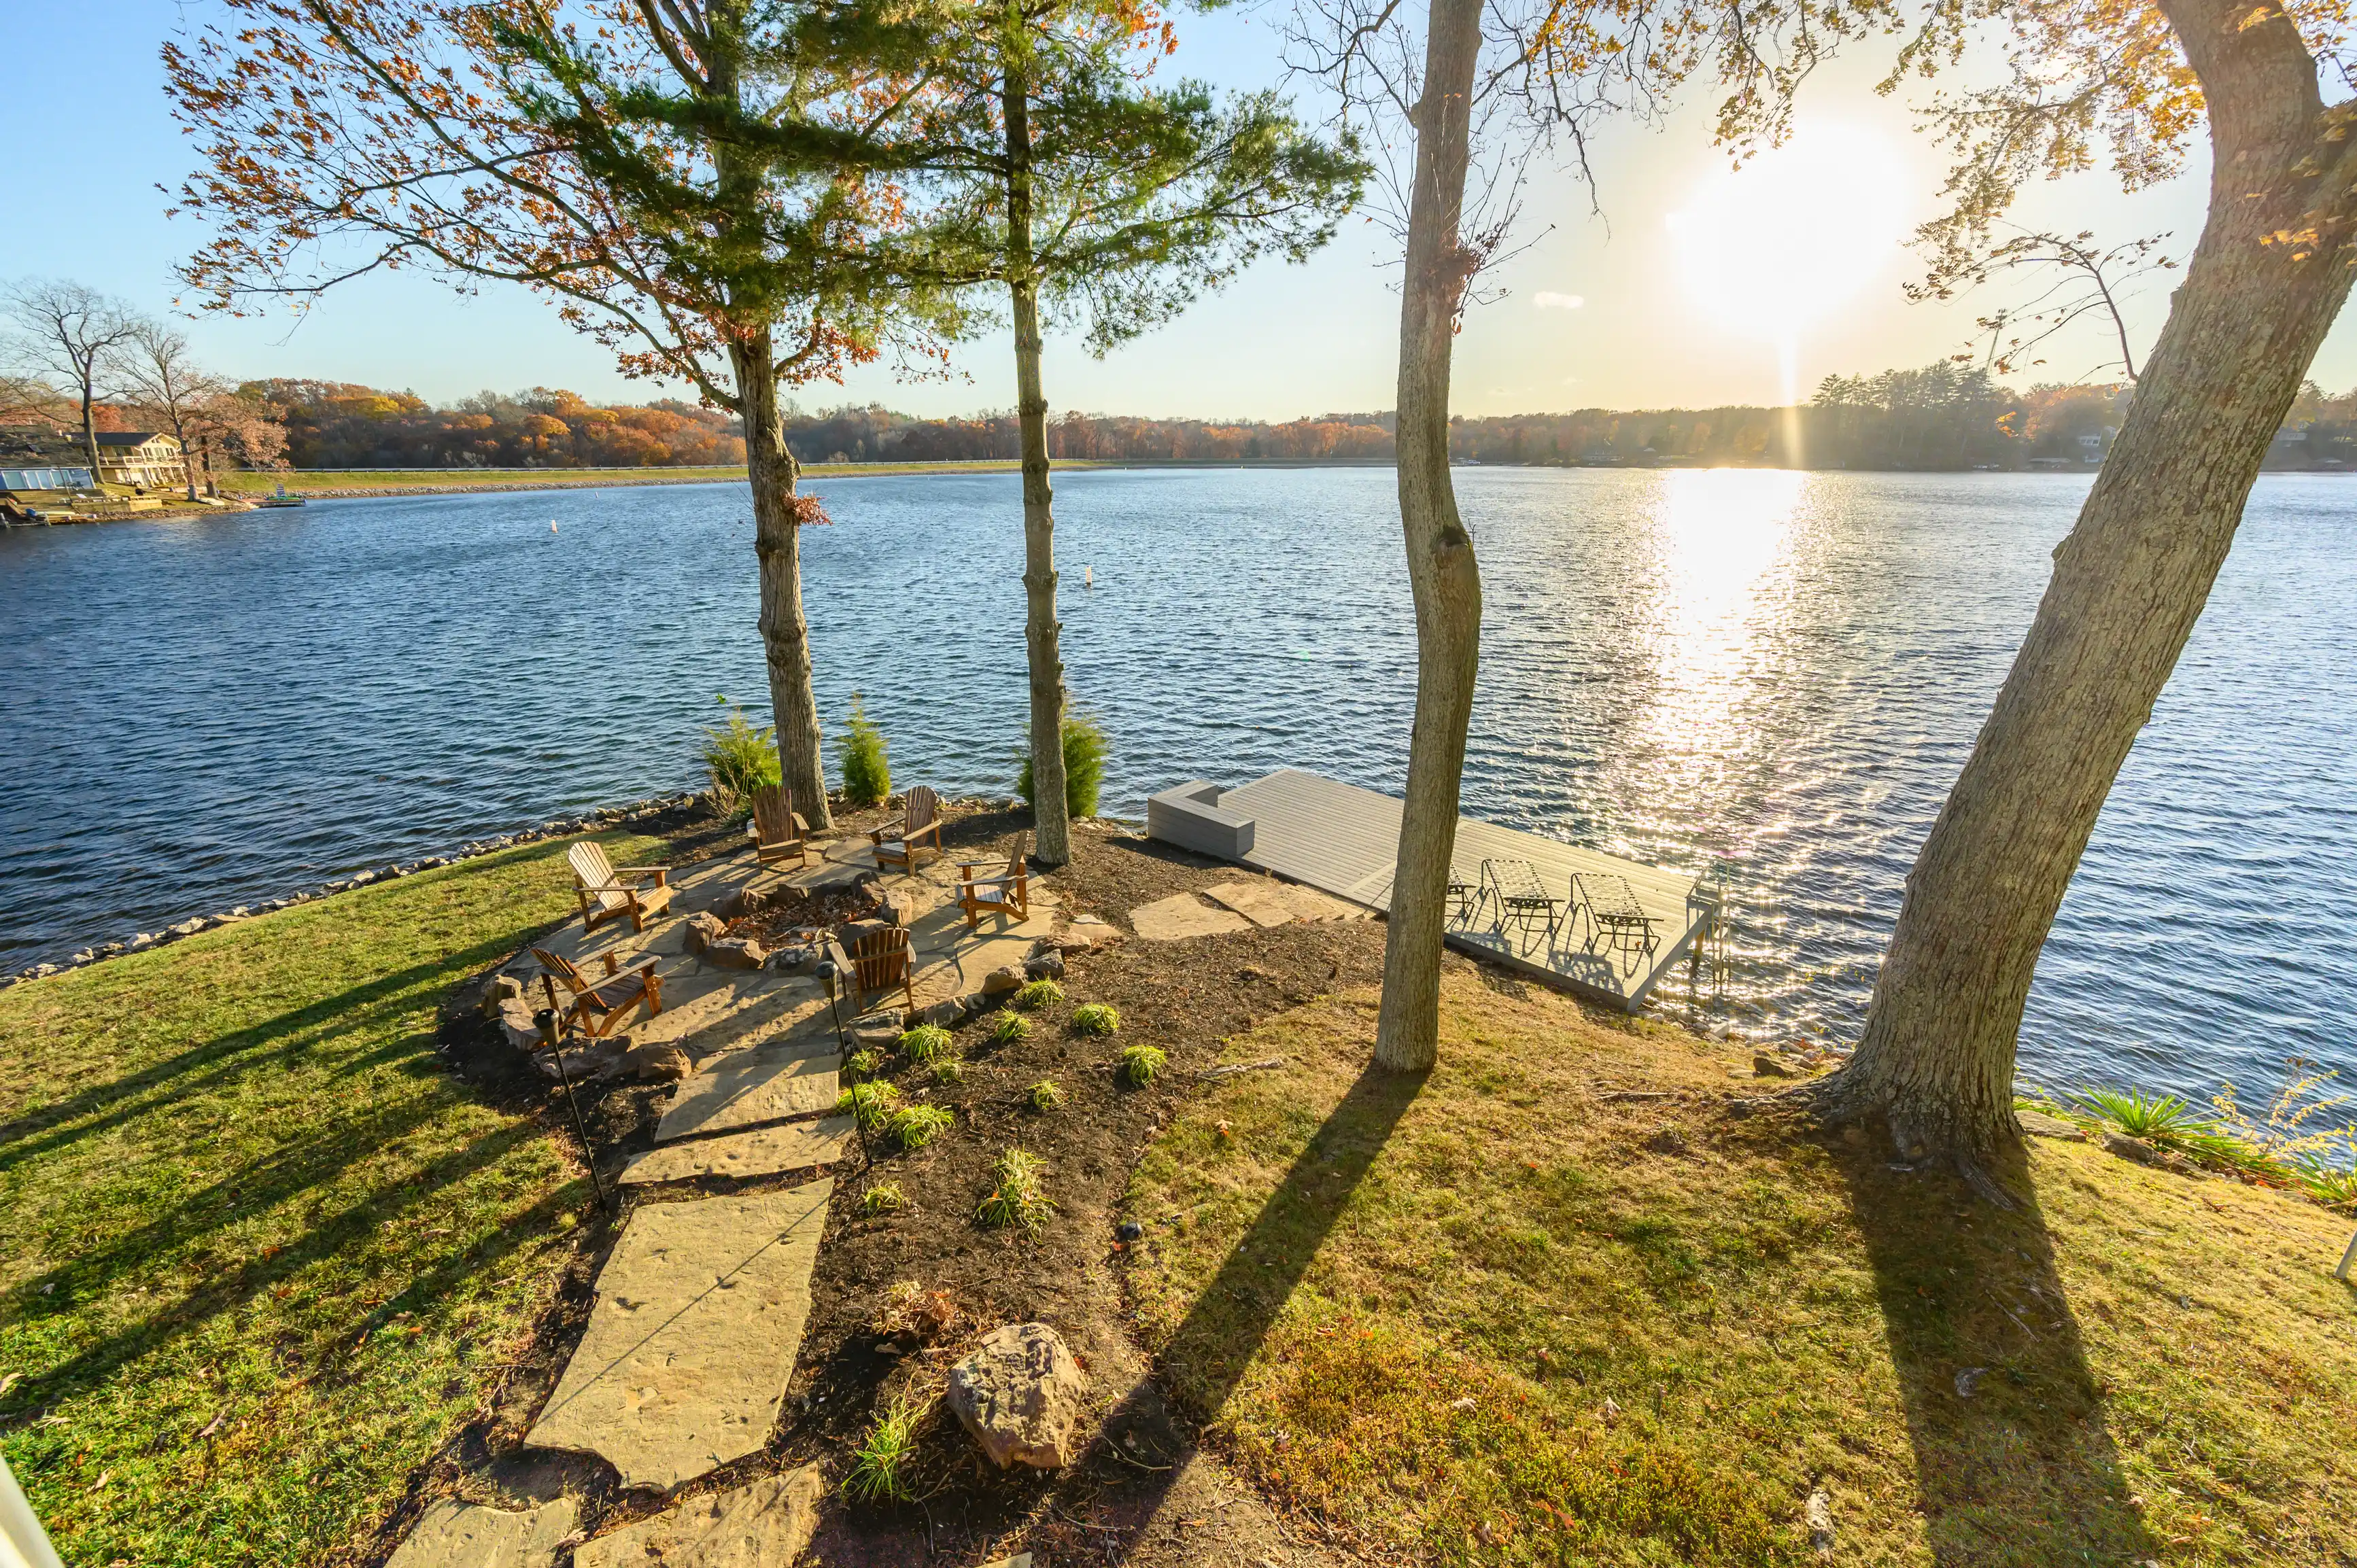 Lakeside backyard with Adirondack chairs, a fire pit, and a wooden pier extending into a tranquil lake surrounded by trees with autumn foliage under a sunny sky.